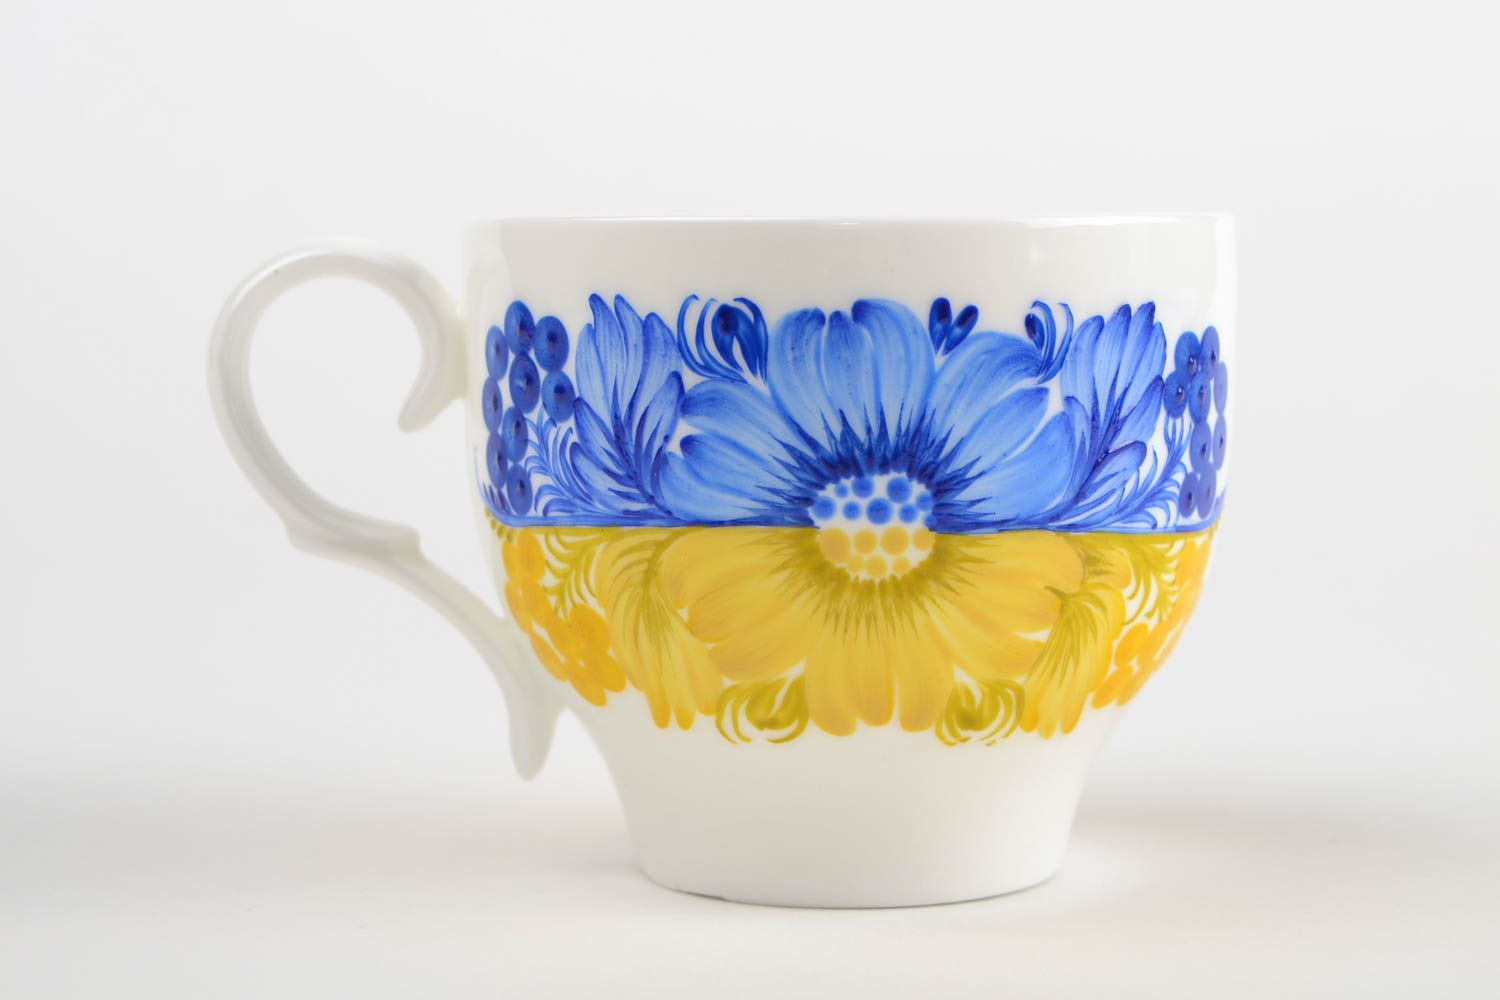 Porcelain teacup in white, yellow, and blue color with handle photo 5